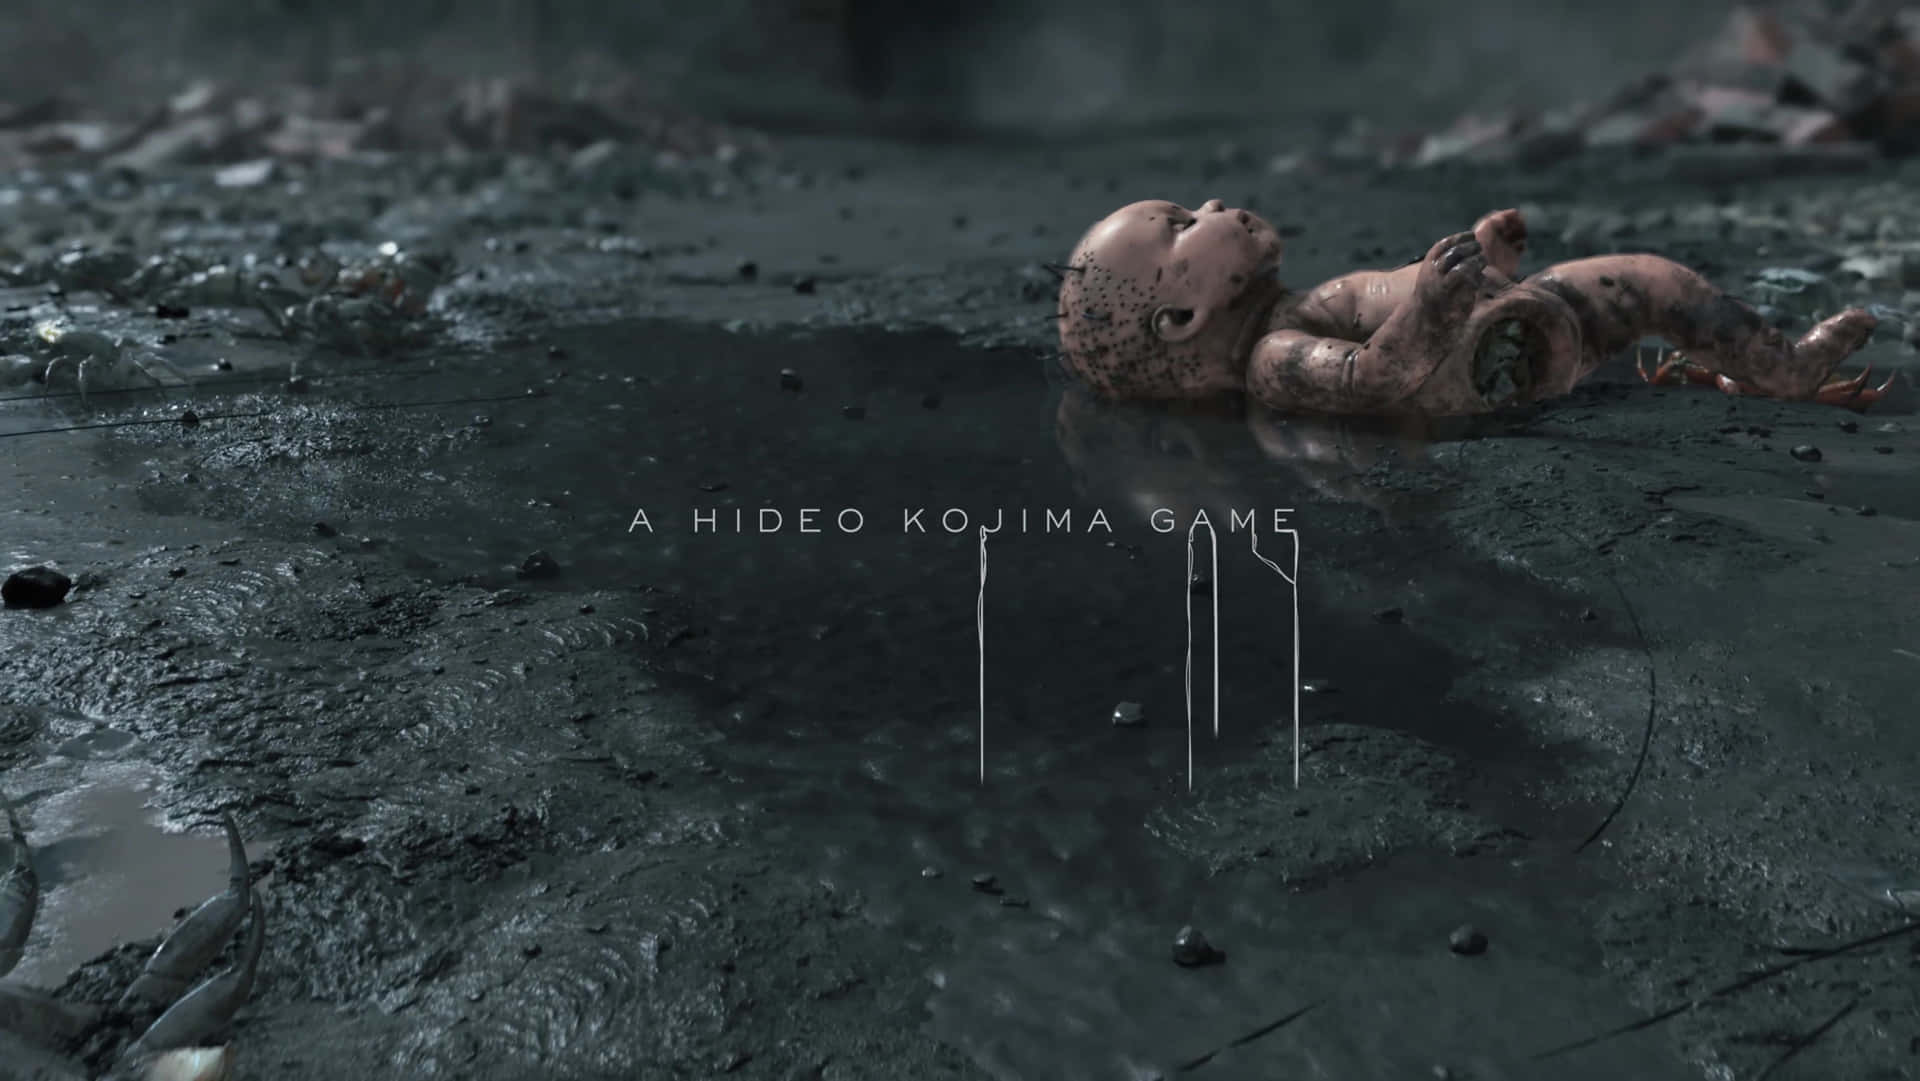 "Discover Never Before Seen Worlds in Death Stranding"